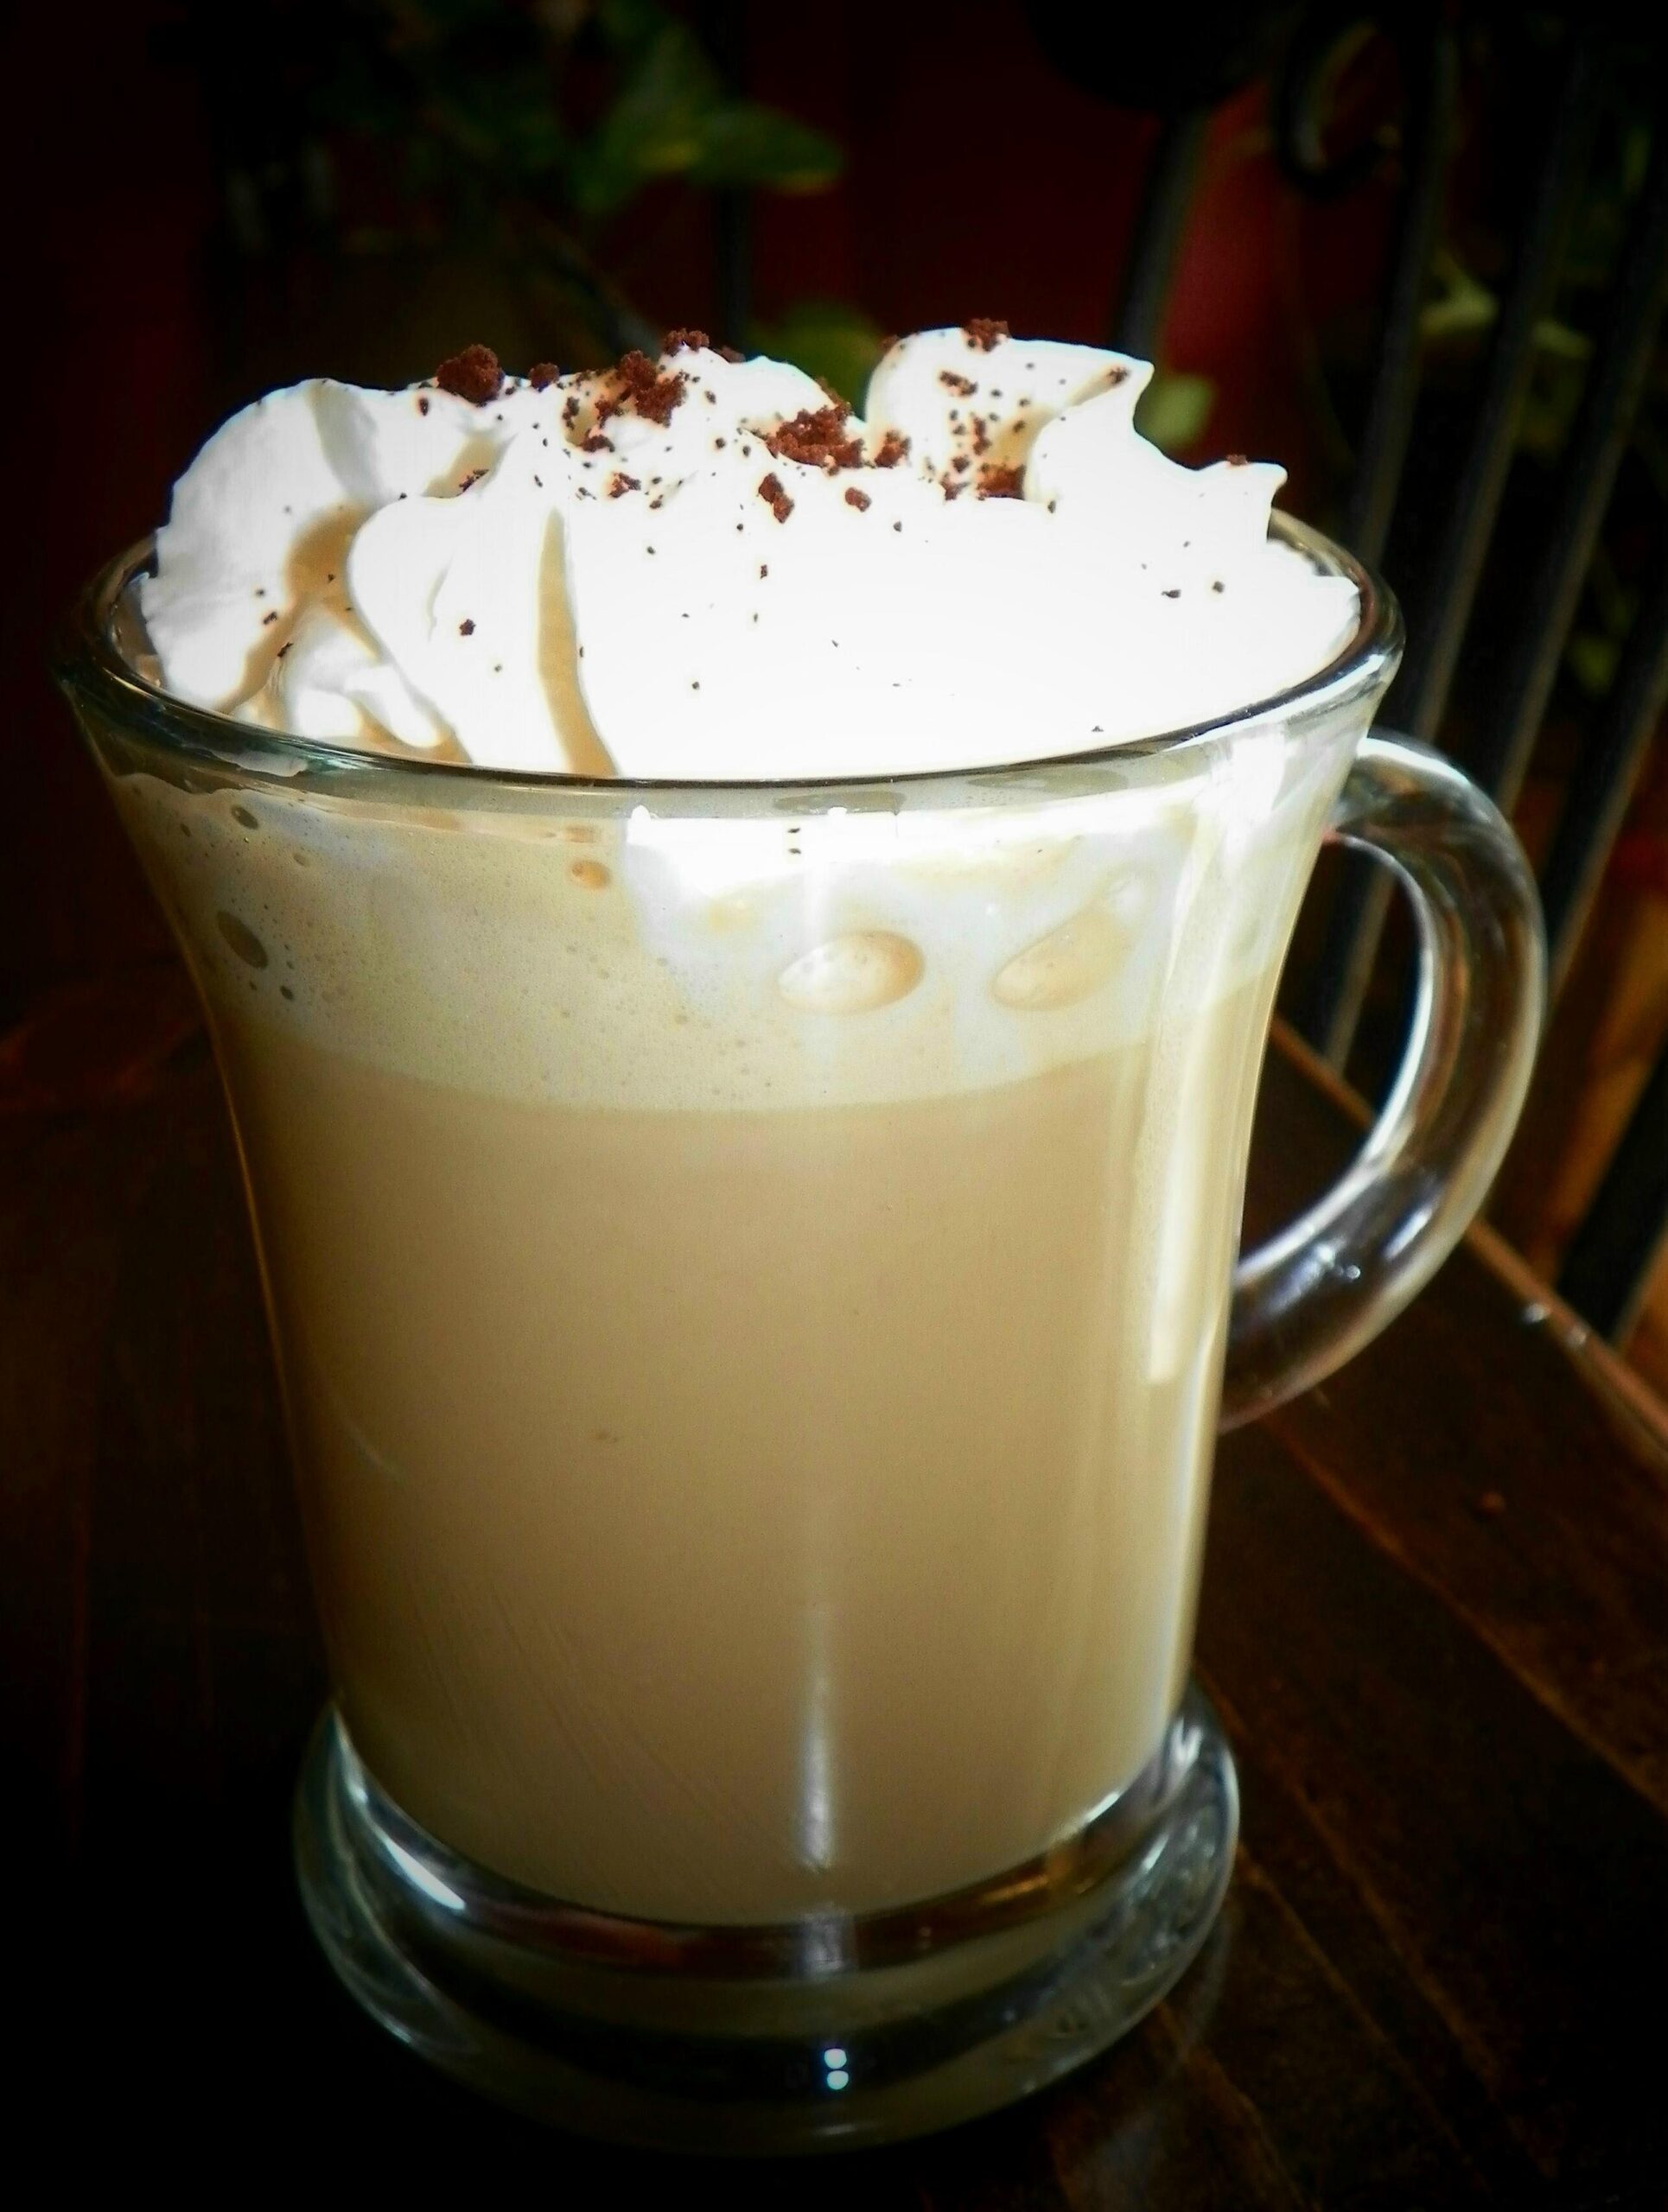  Satisfy your sweet tooth with our White Chocolate Baileys Latte